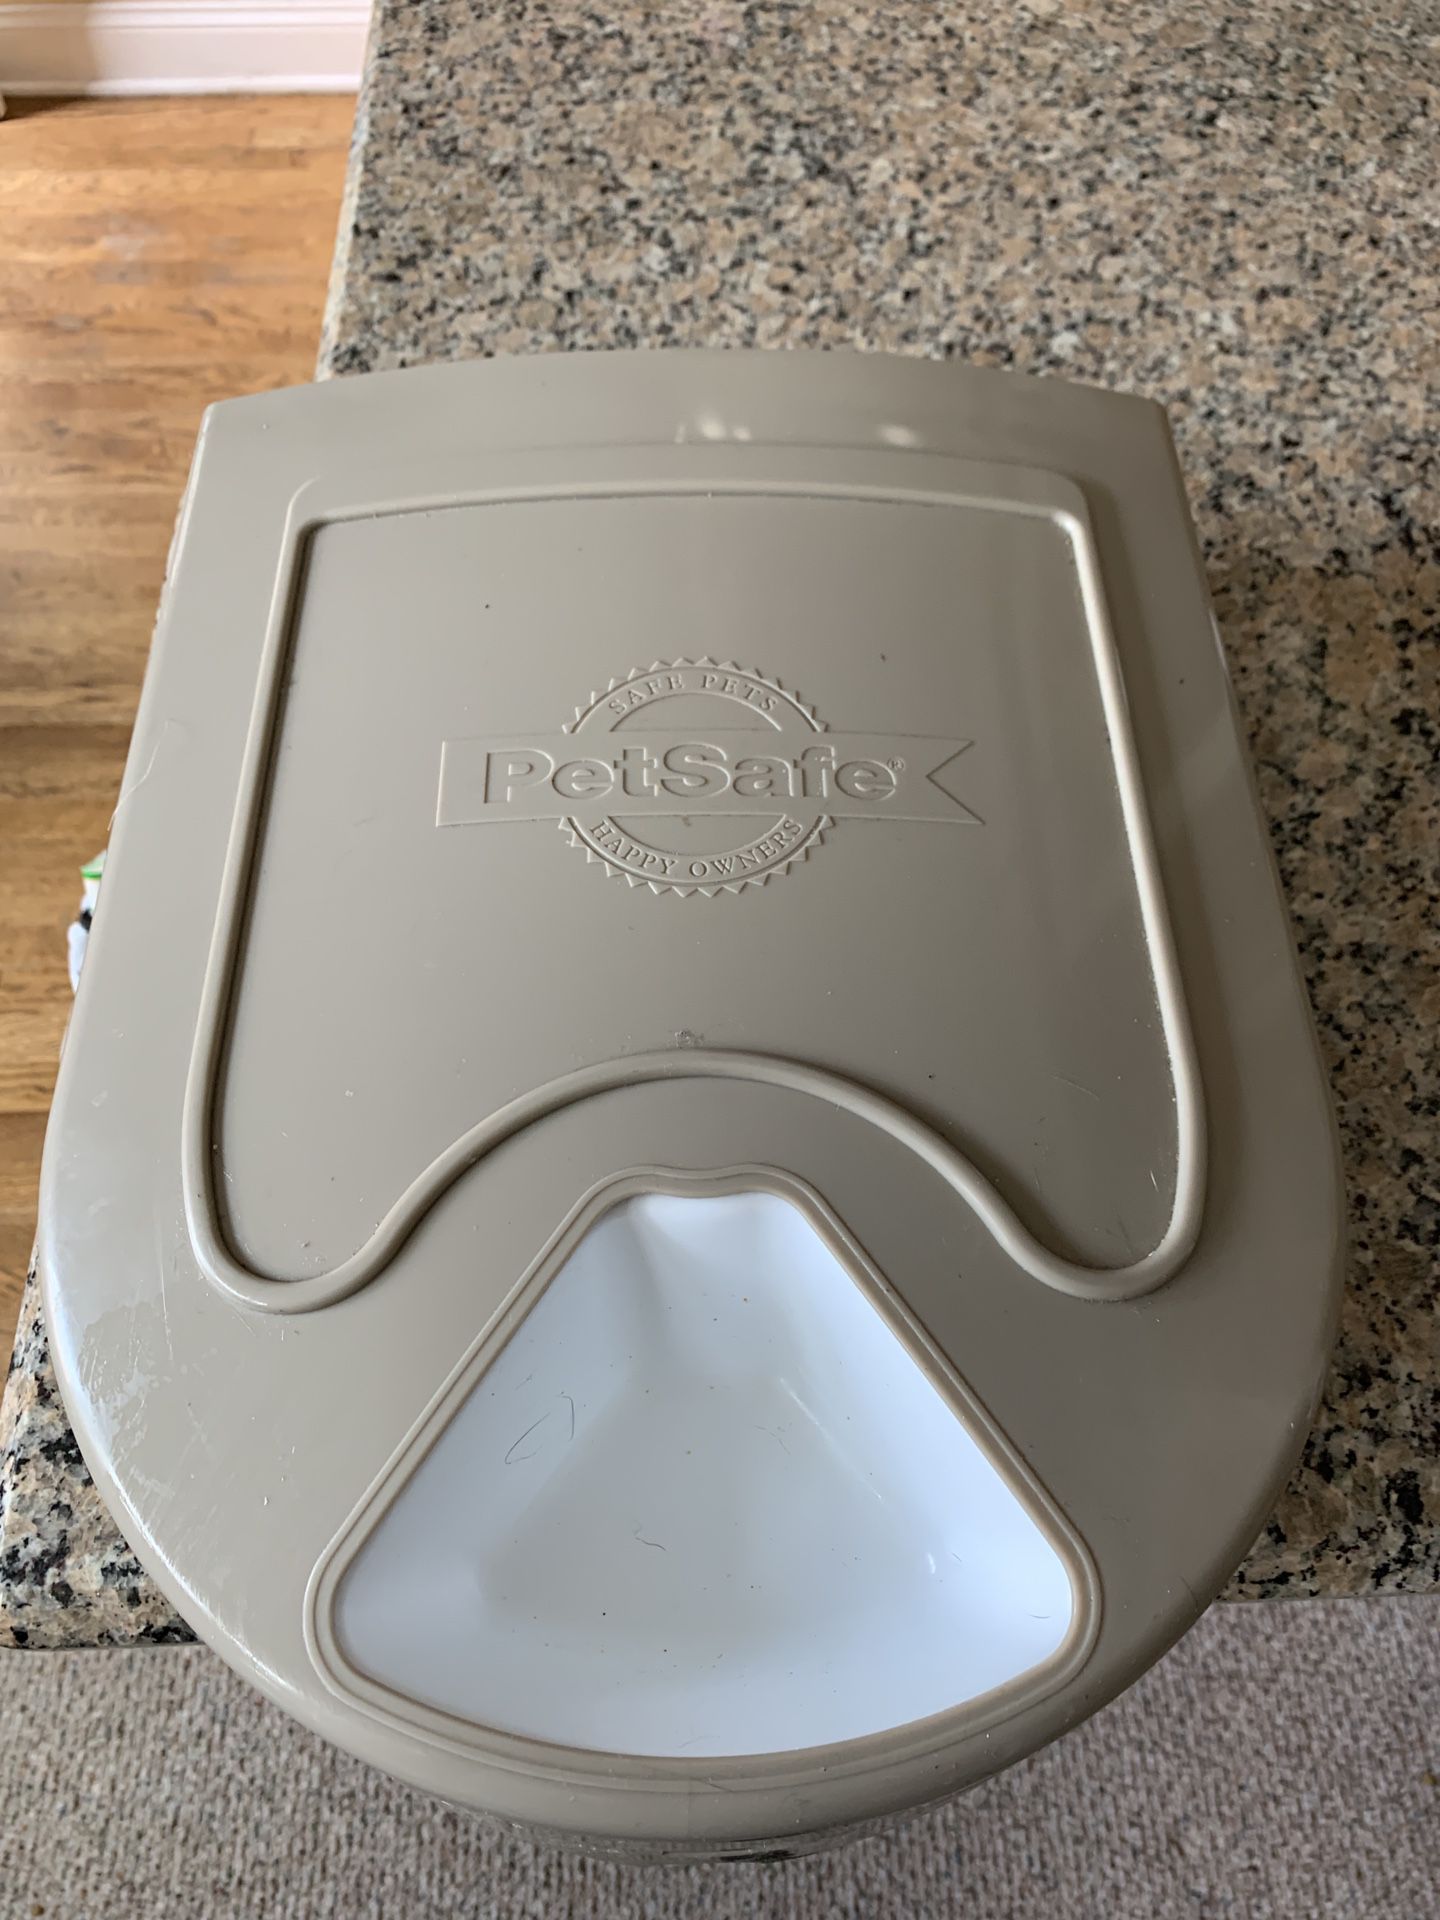 Automatic 5 meal pet feeder